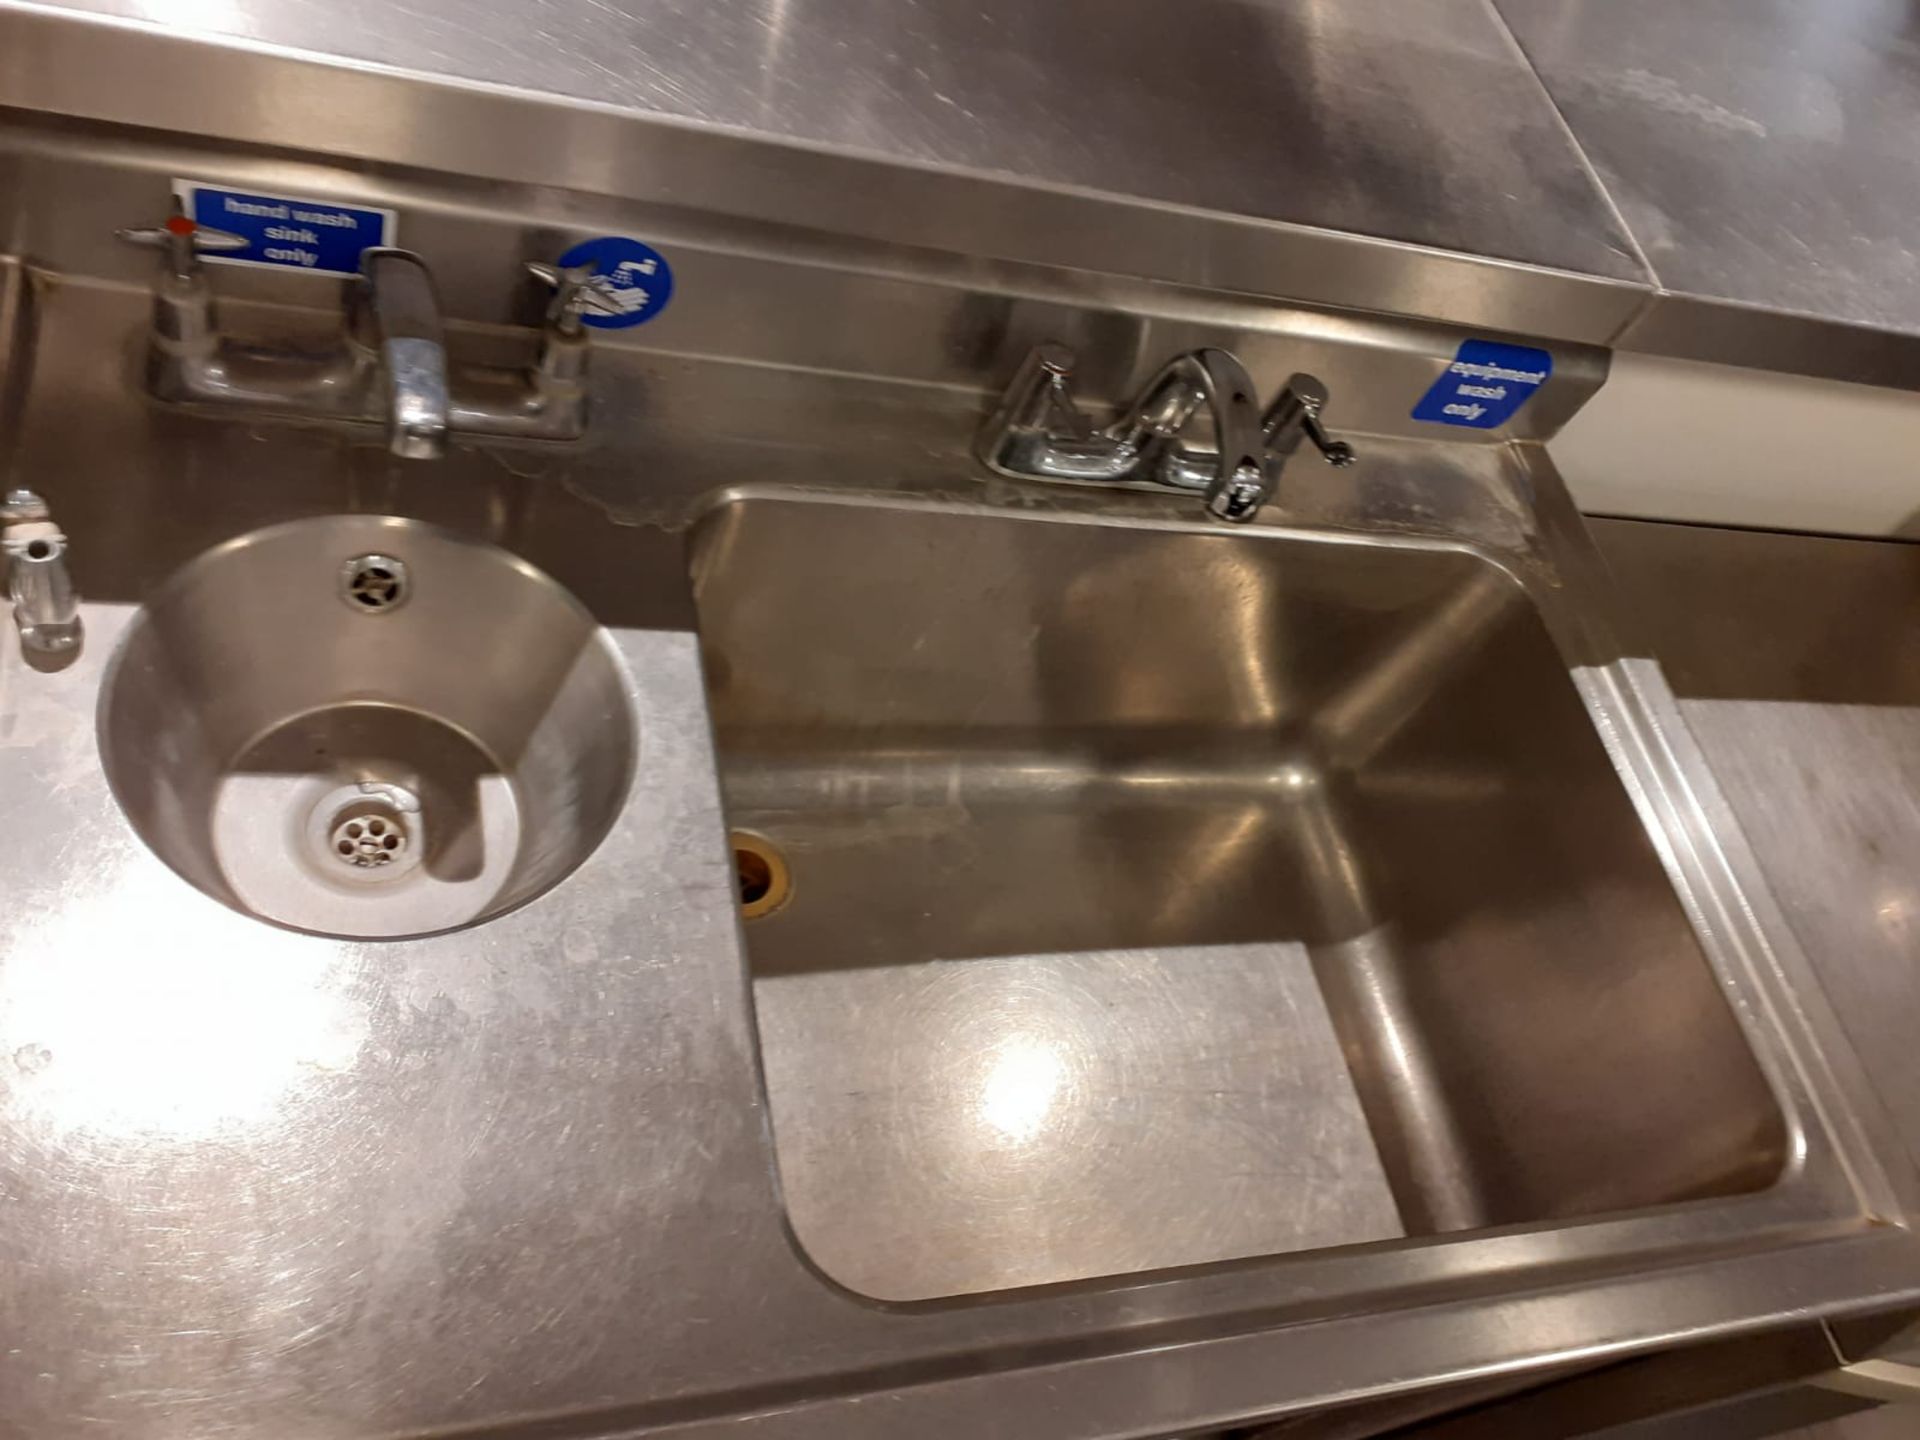 1 x Large Food Prep Sink Wash Unit With Mixer Taps and Hand Wash Basin - CL582 - Location: London - Image 5 of 5